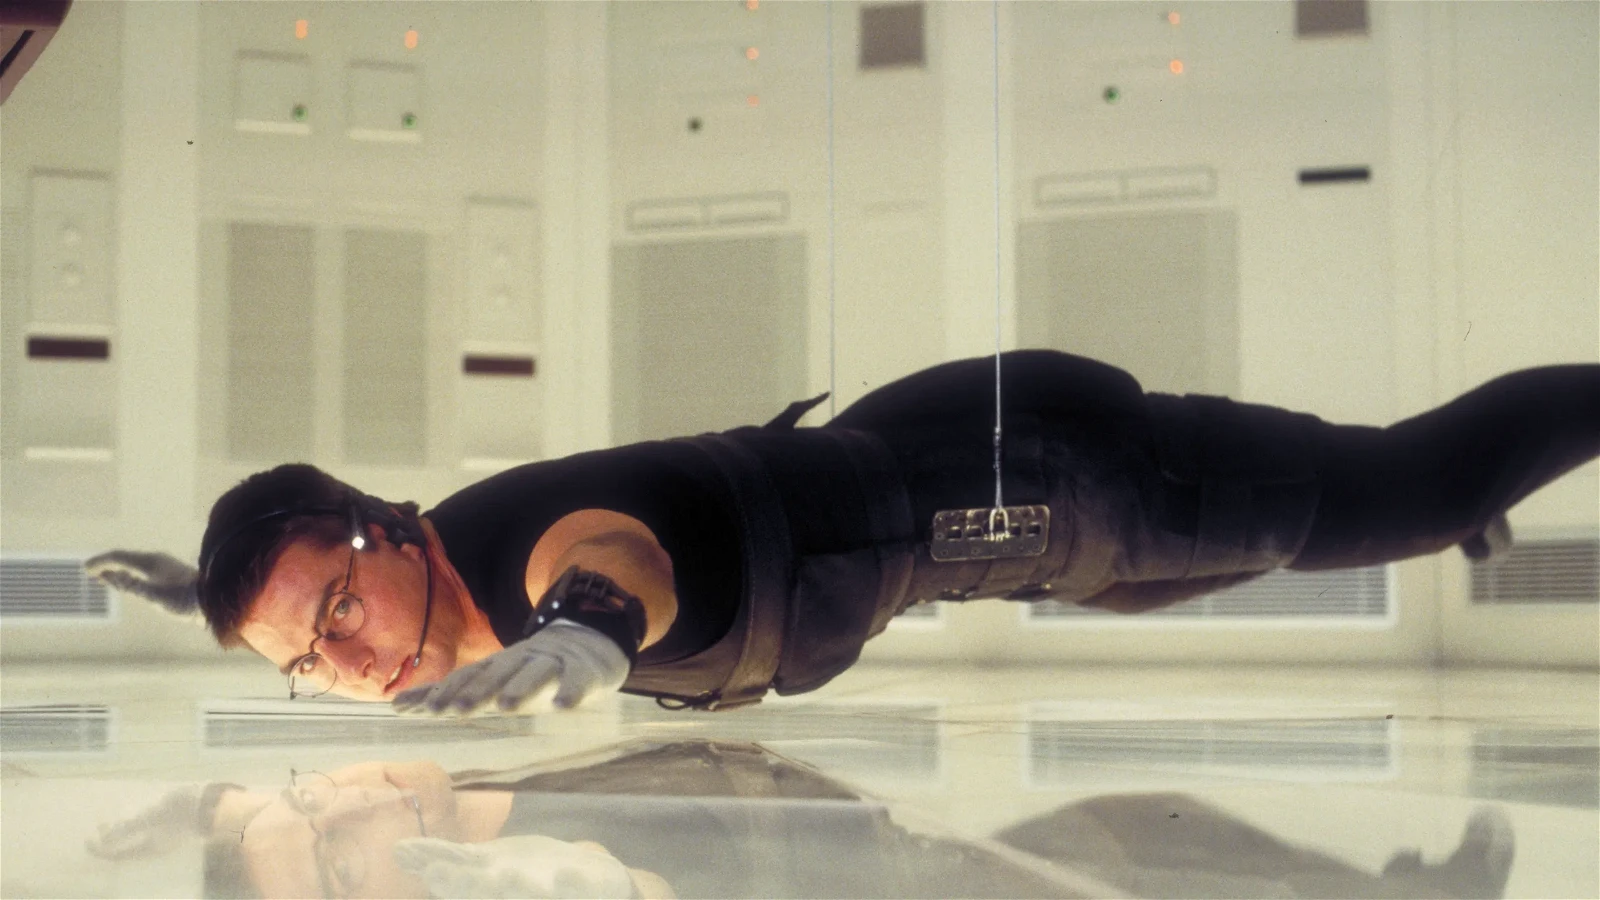 Tom Cruise in a still from The Mission: Impossible franchise